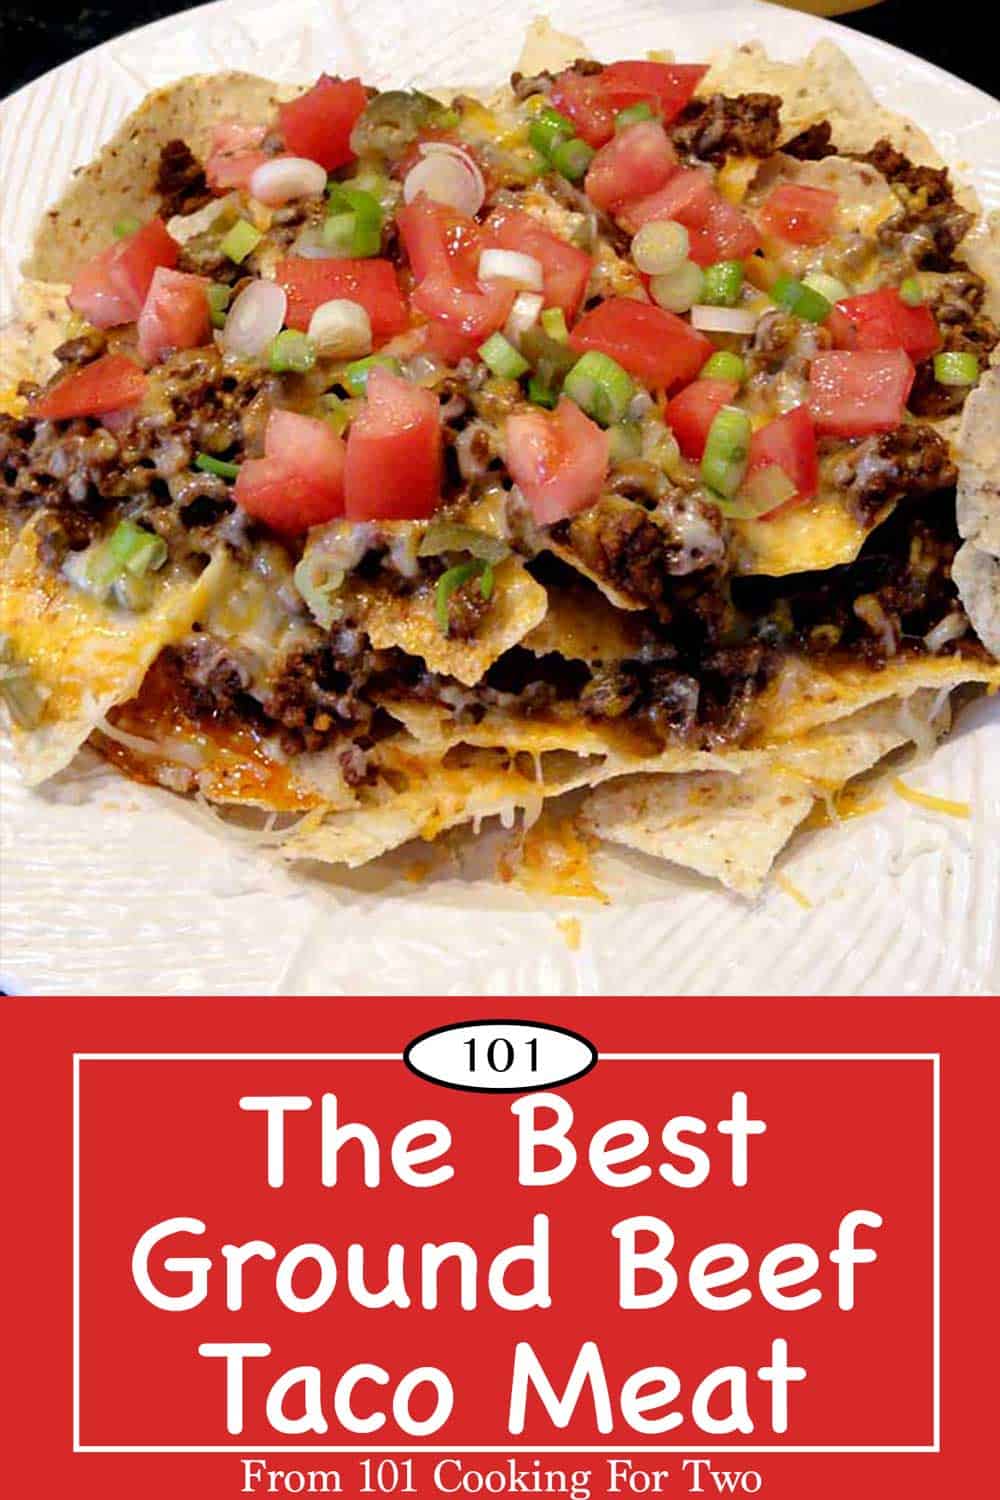 The Best Ground Beef Taco Meat | 101 Cooking For Two